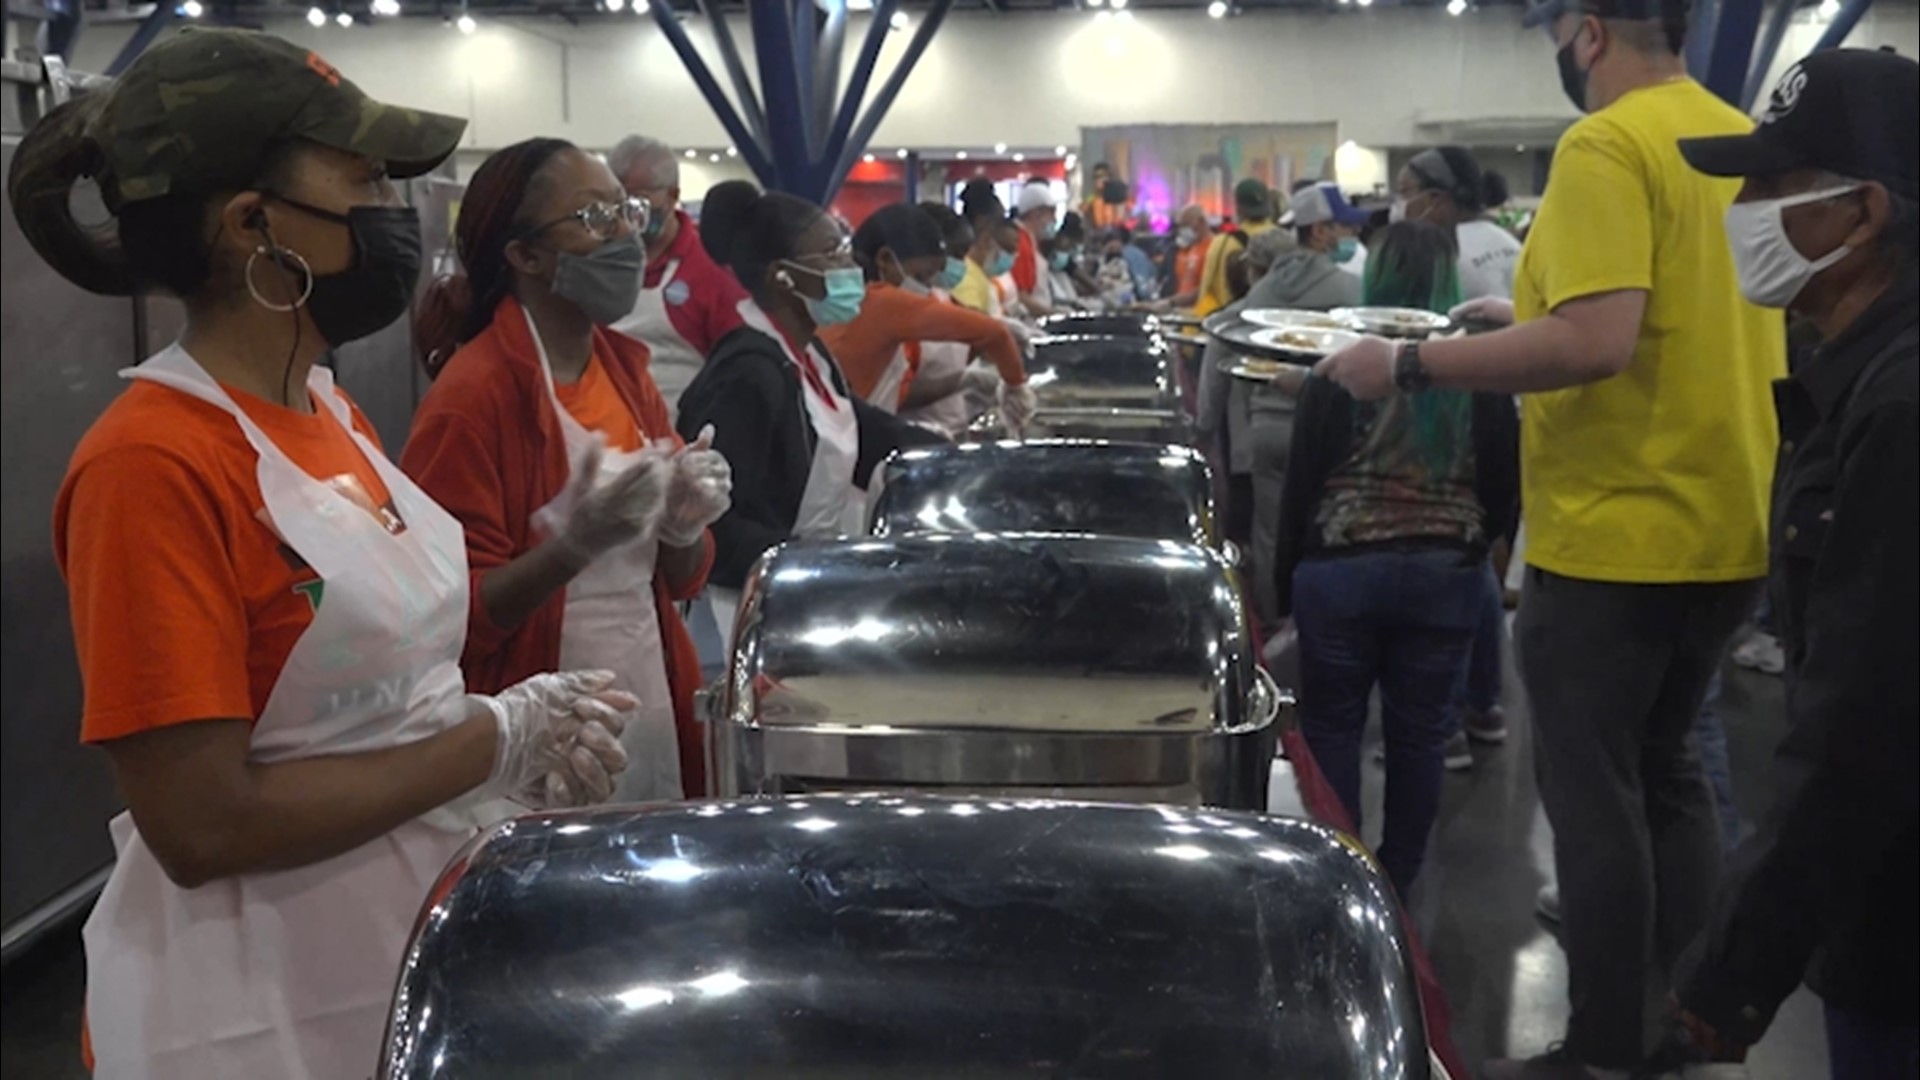 Hundreds of volunteers helped dish out warm meals on Thanksgiving.